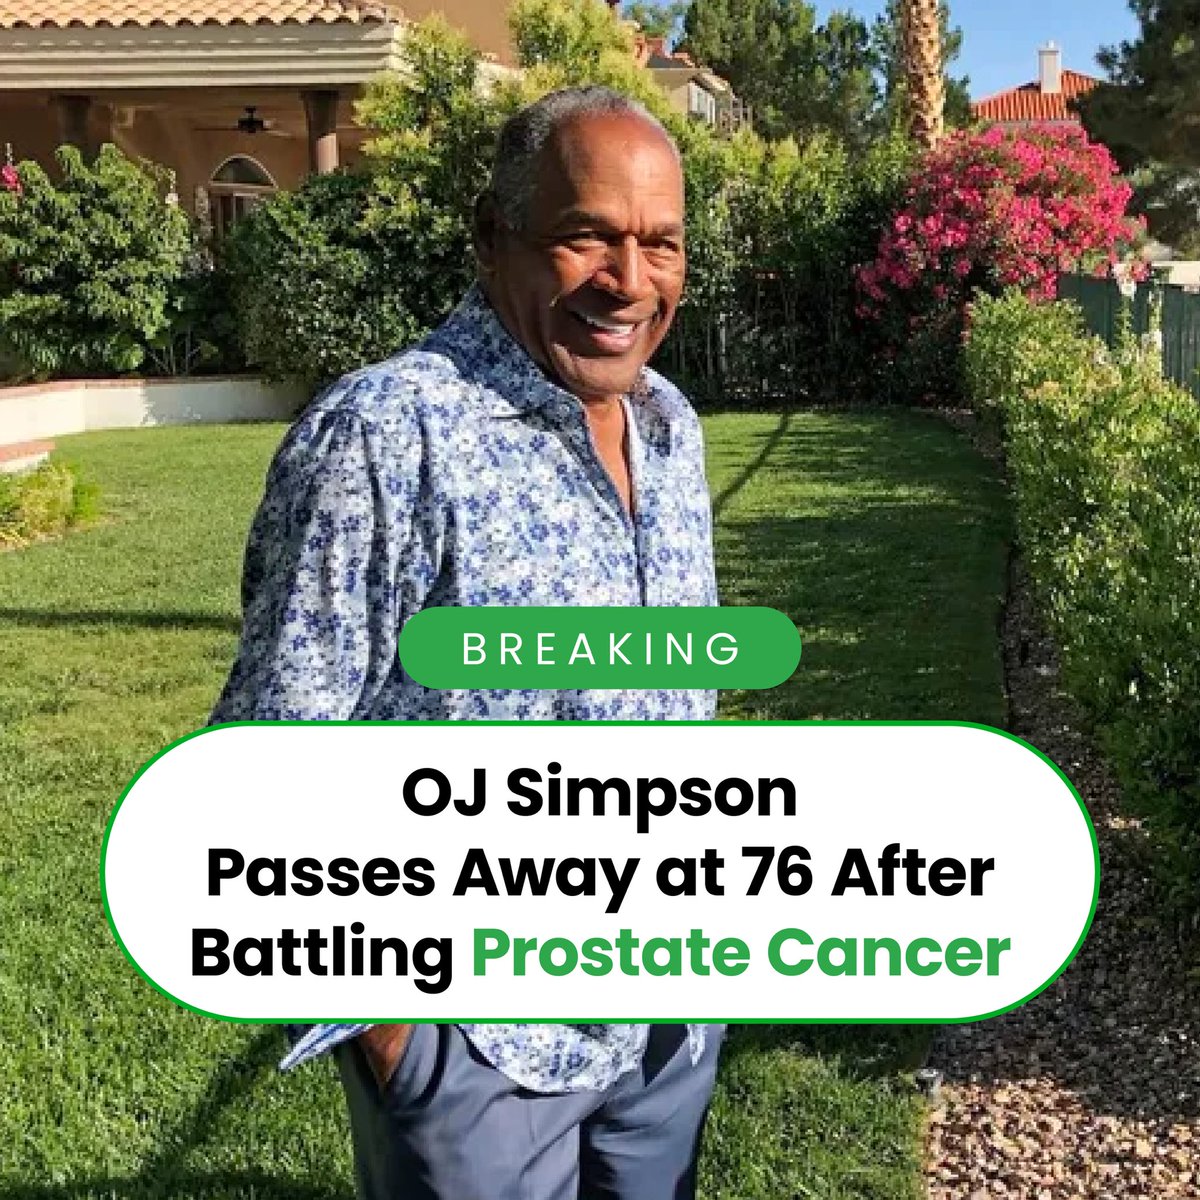 O.J. Simpson has passed away at age 76 after battling prostate cancer. According to the @AmericanCancer, black men are 70 percent more likely than their white counterparts to get prostate cancer. 🧵1/3